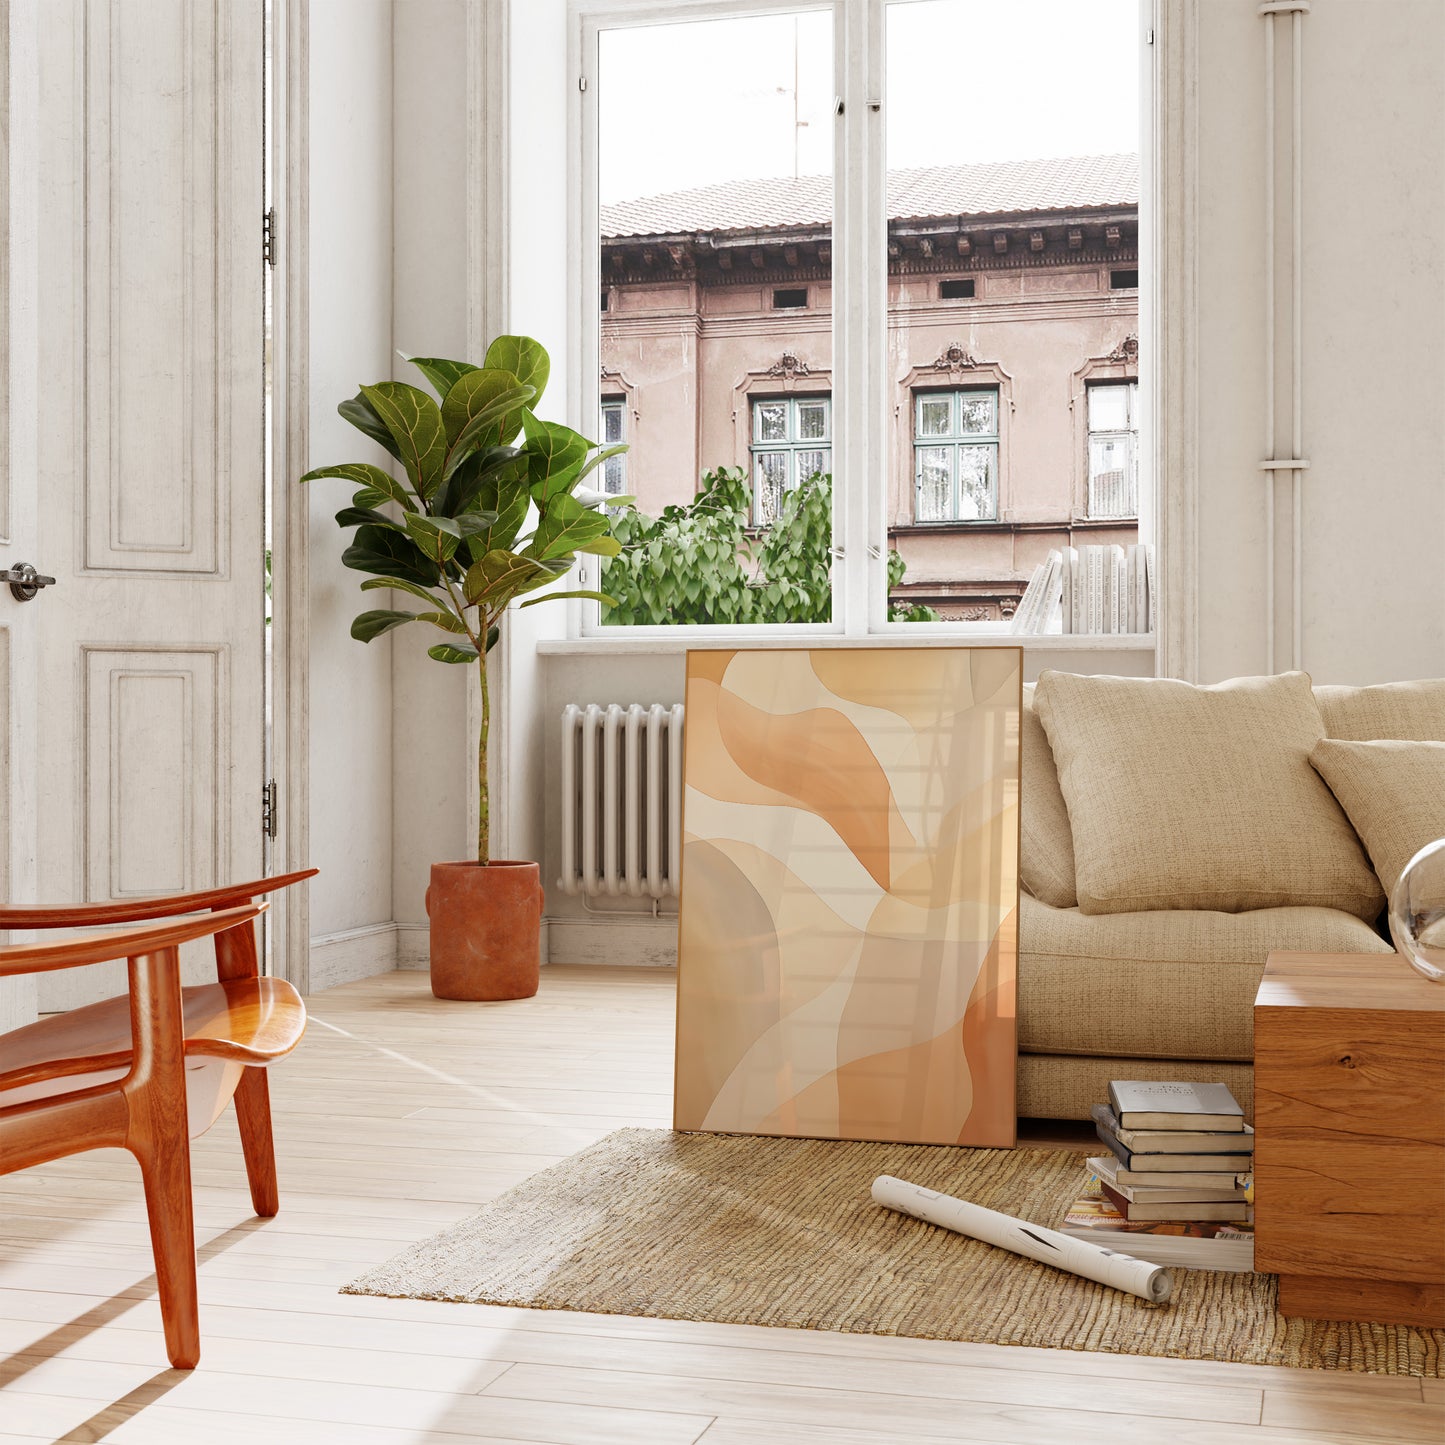 Alt text: A cozy living room with an open door, a sofa, modern art, and a green plant.